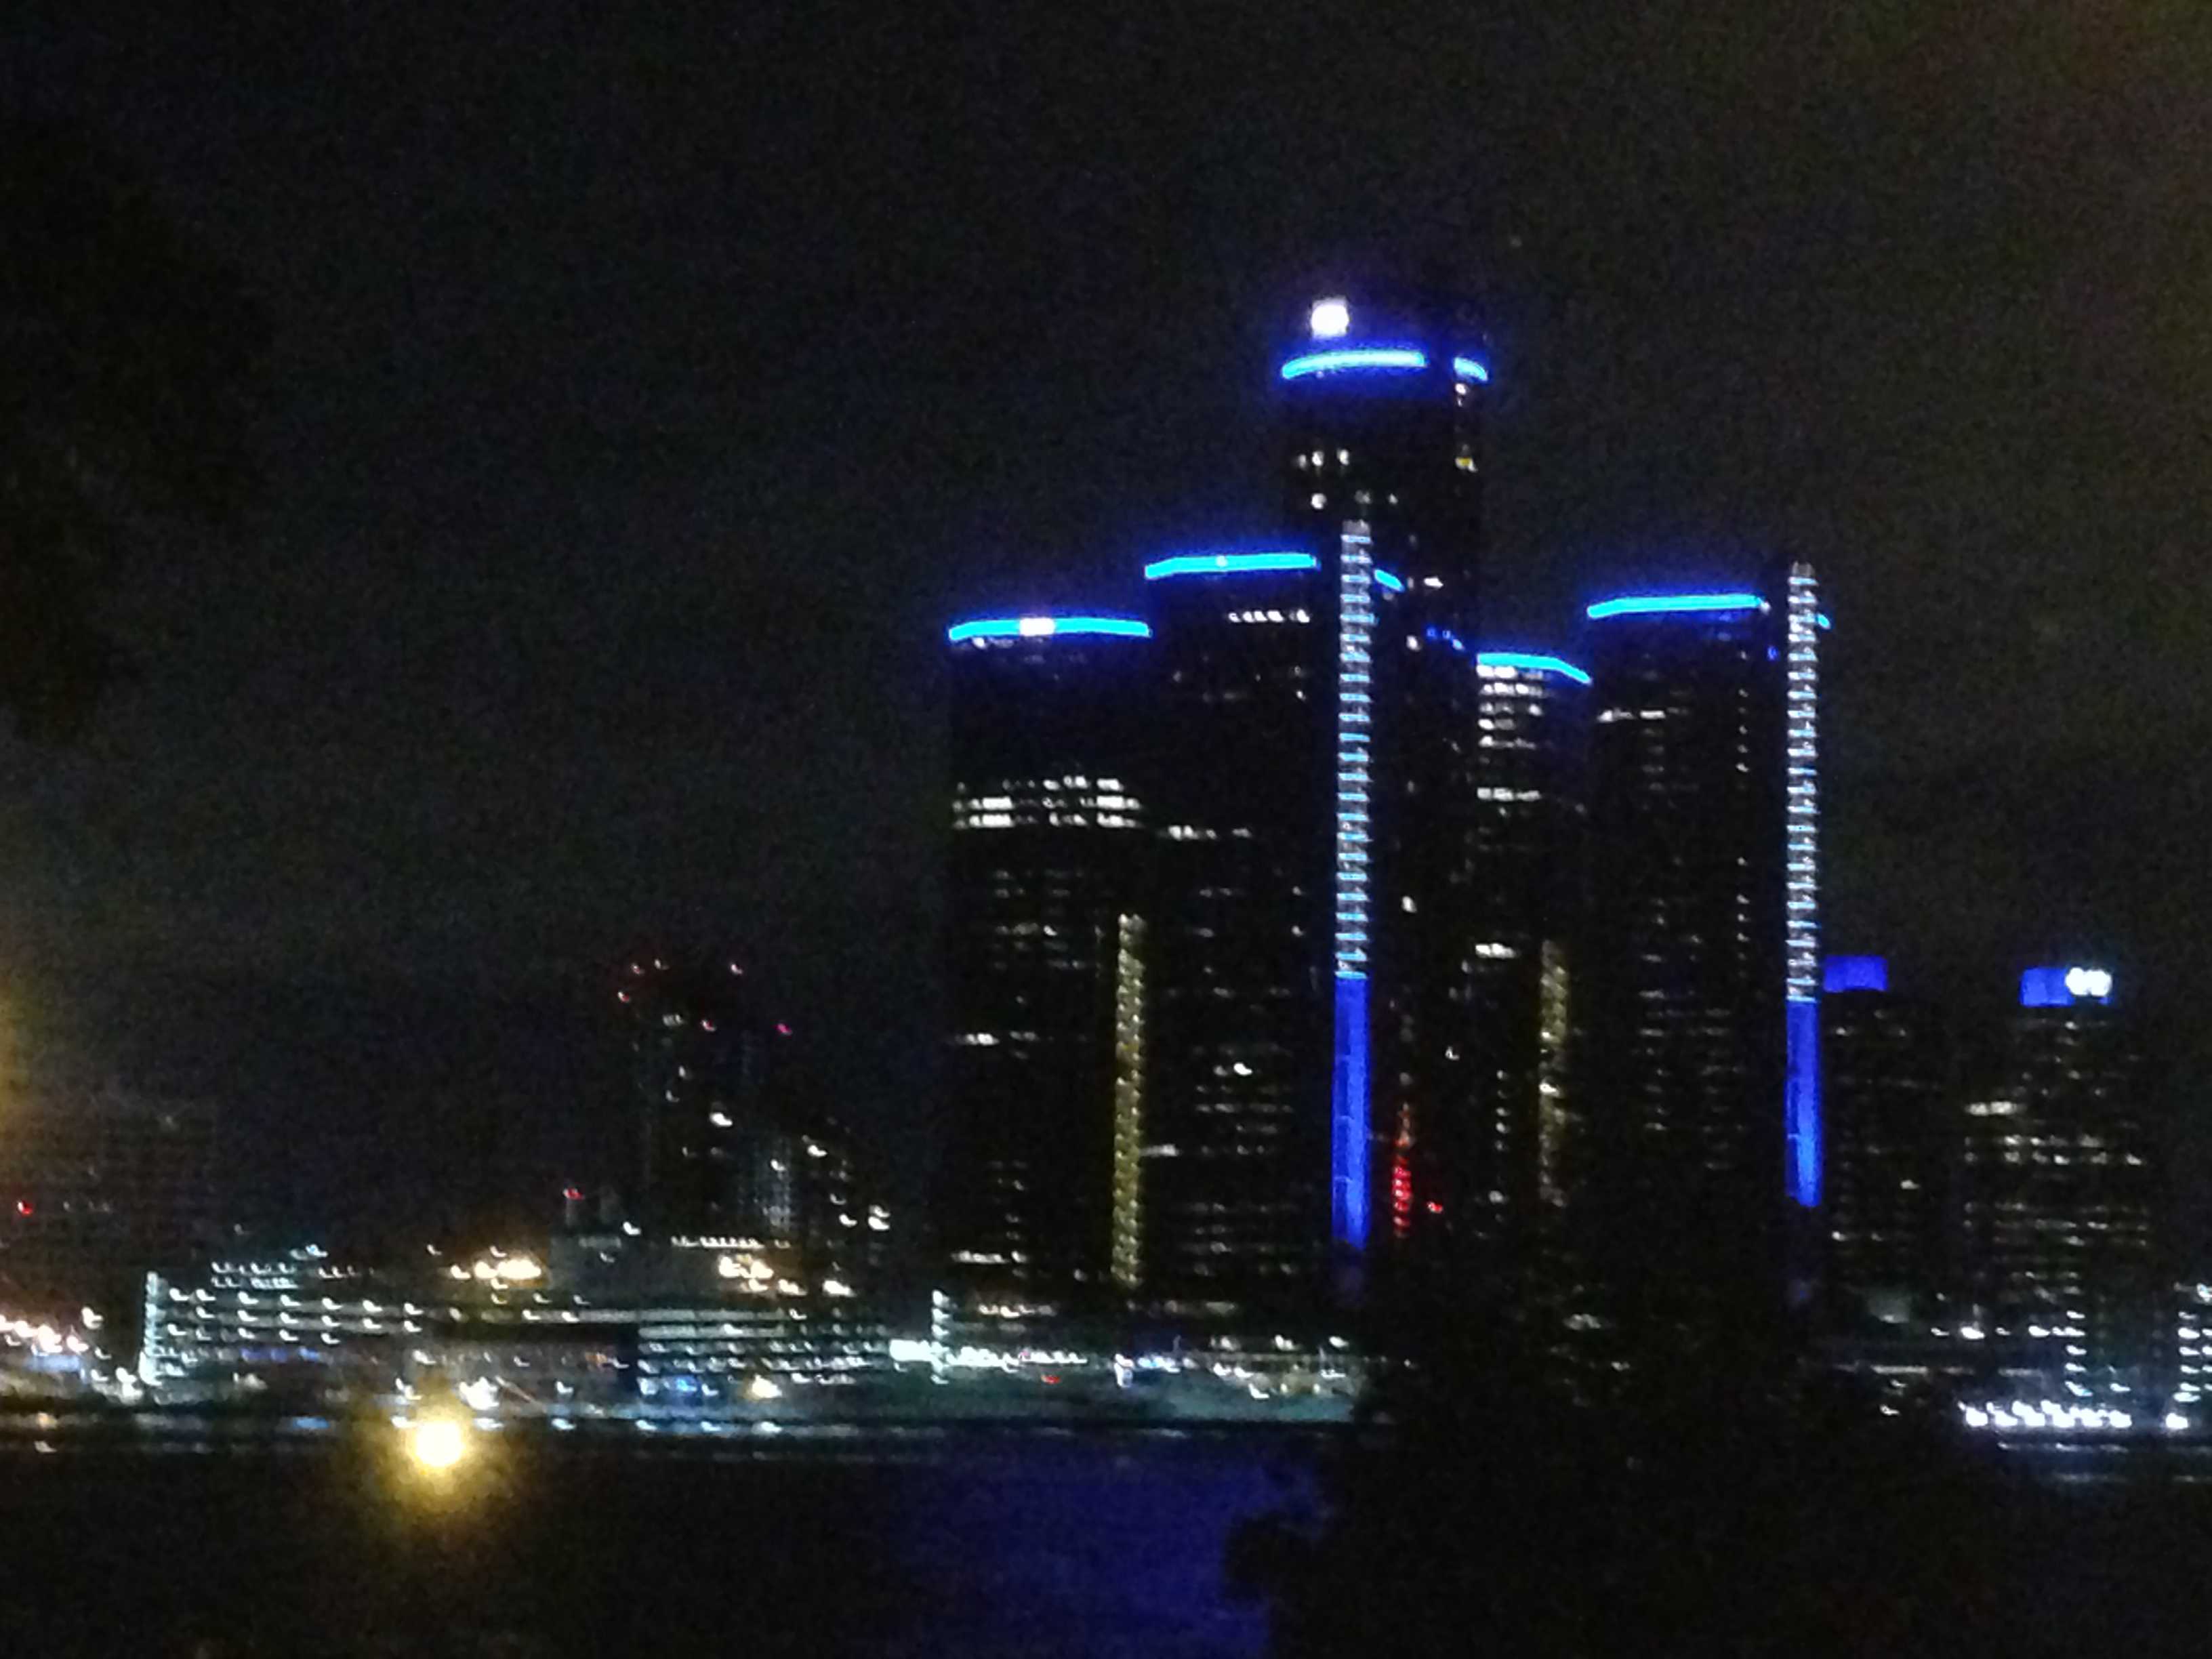 Detroit from Windsor, Ontario, Canada